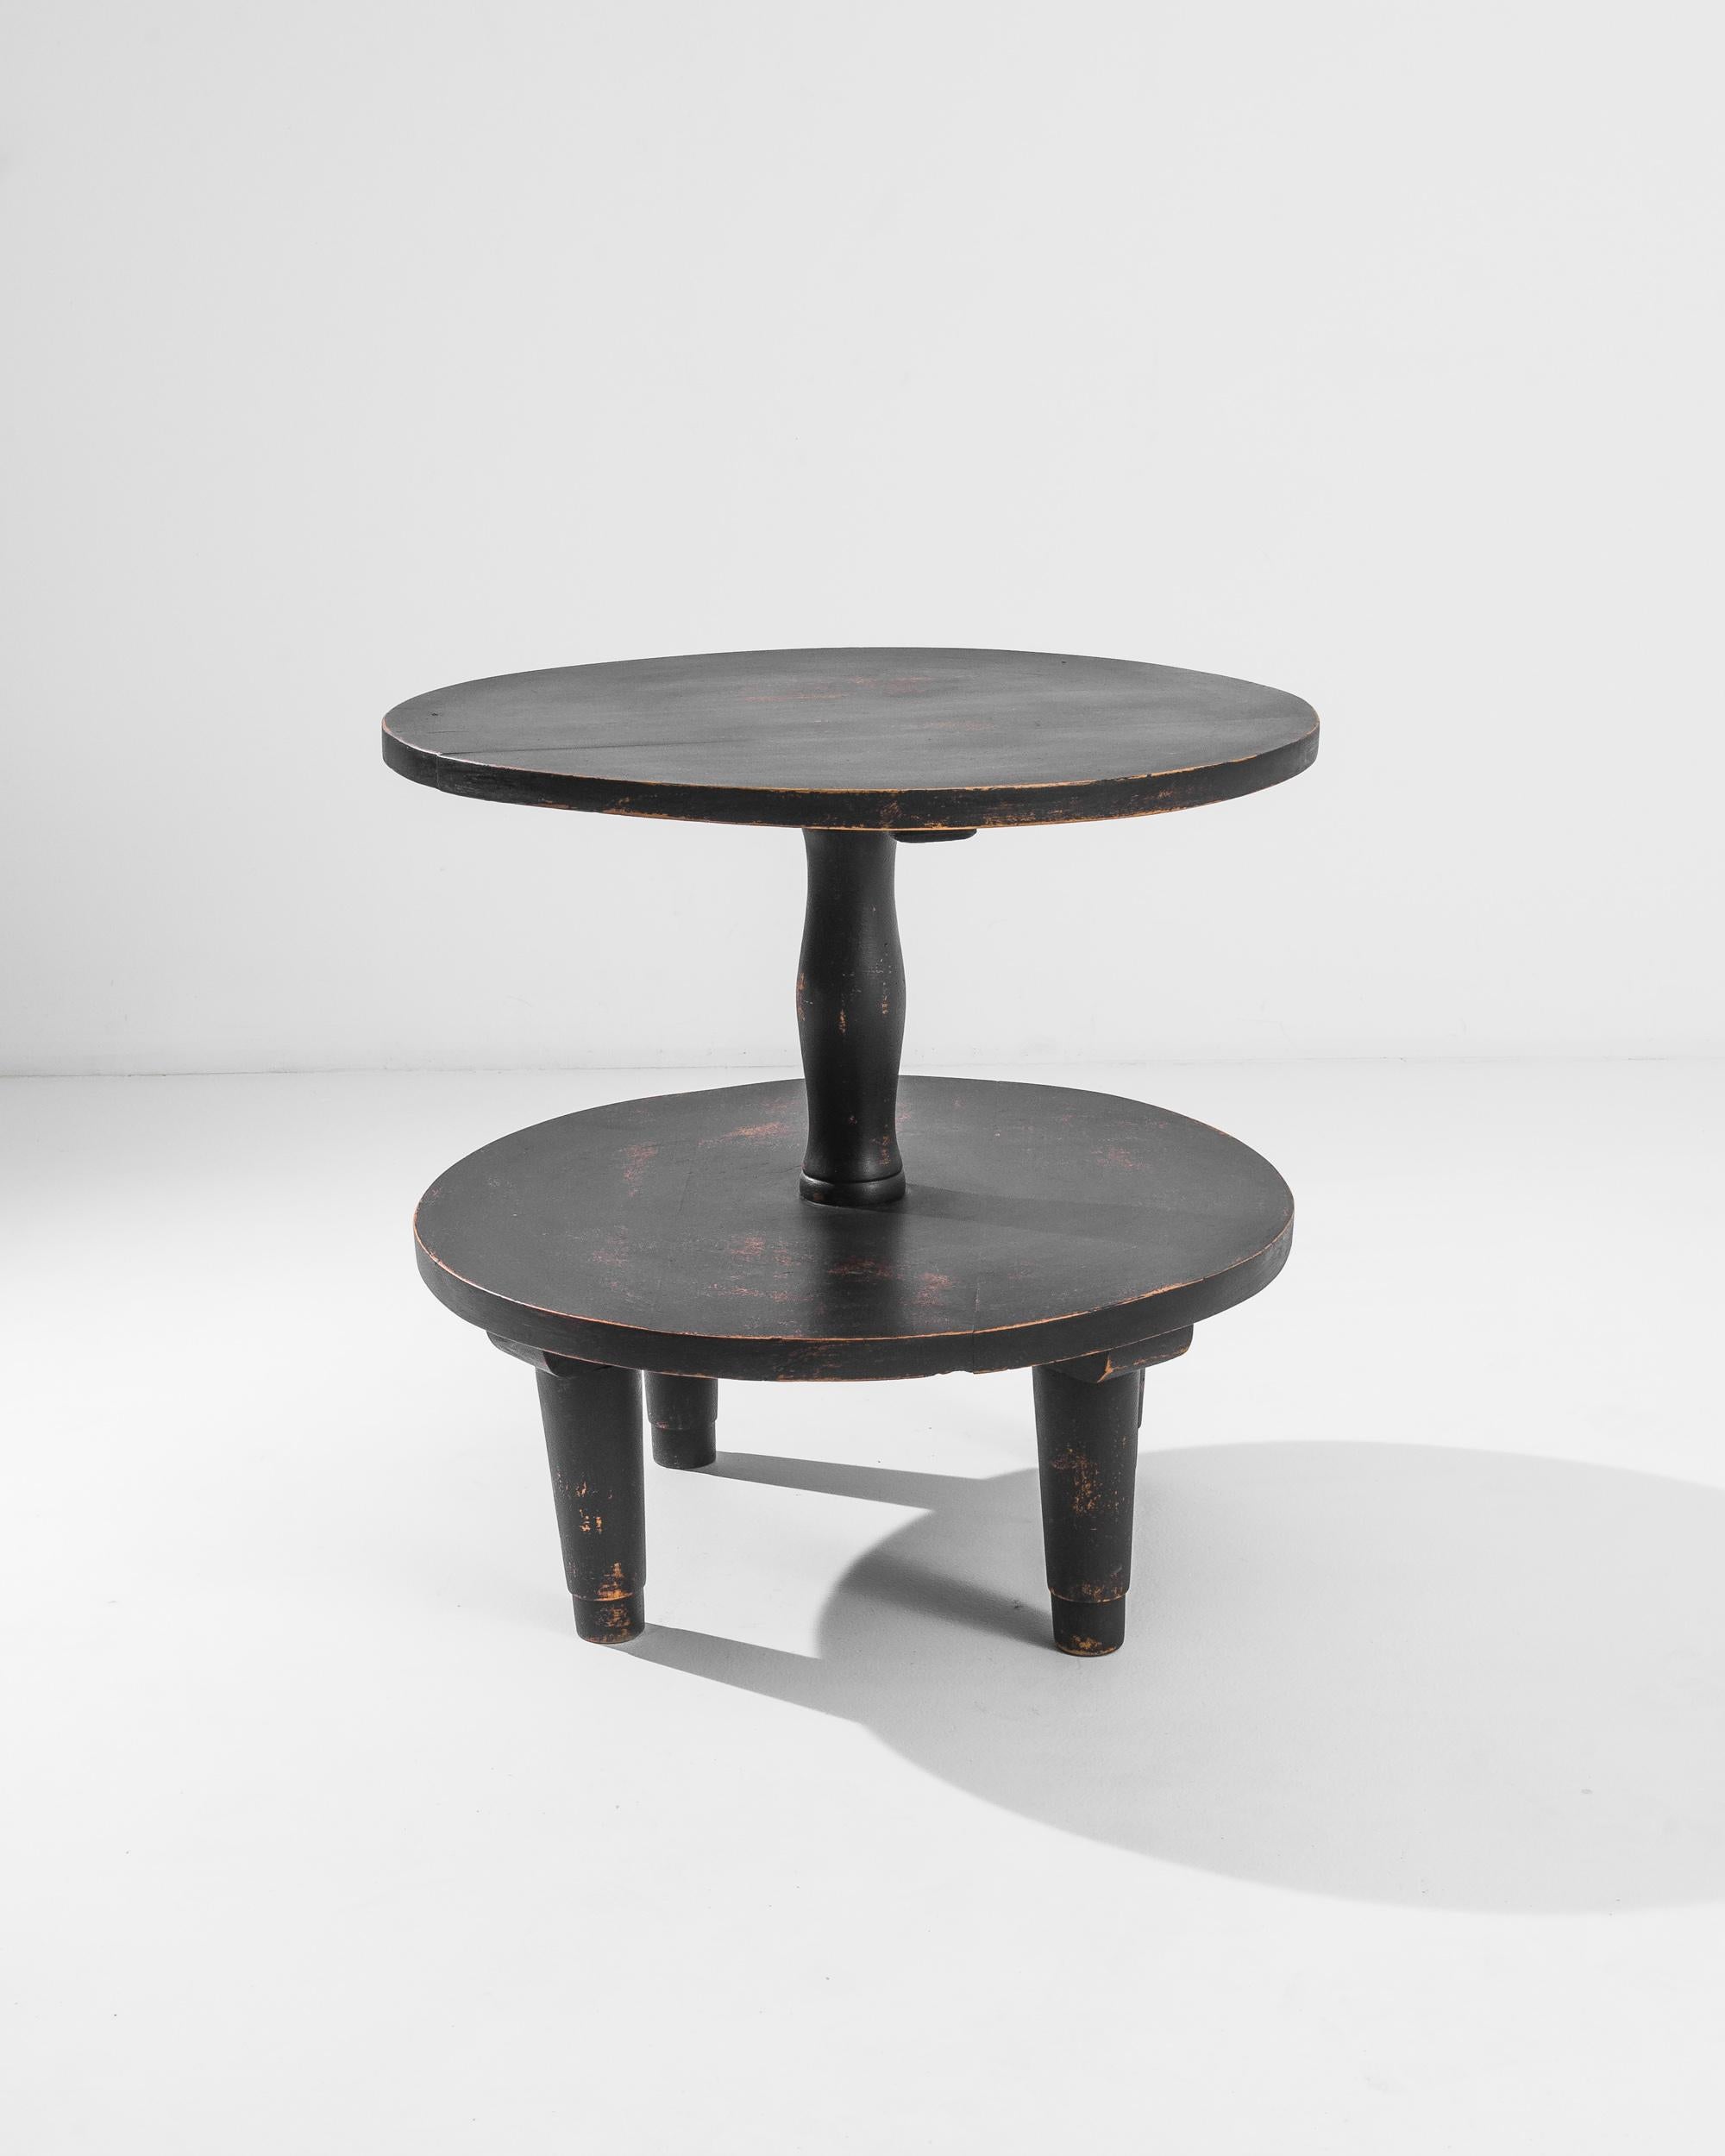 A vintage side table produced in France circa 1950, offering a beautifully distressed patina and a two-tier design. Standing on four stout tapered feet, this ergonomic piece rises above a modest twenty-four inches and is assembled around an